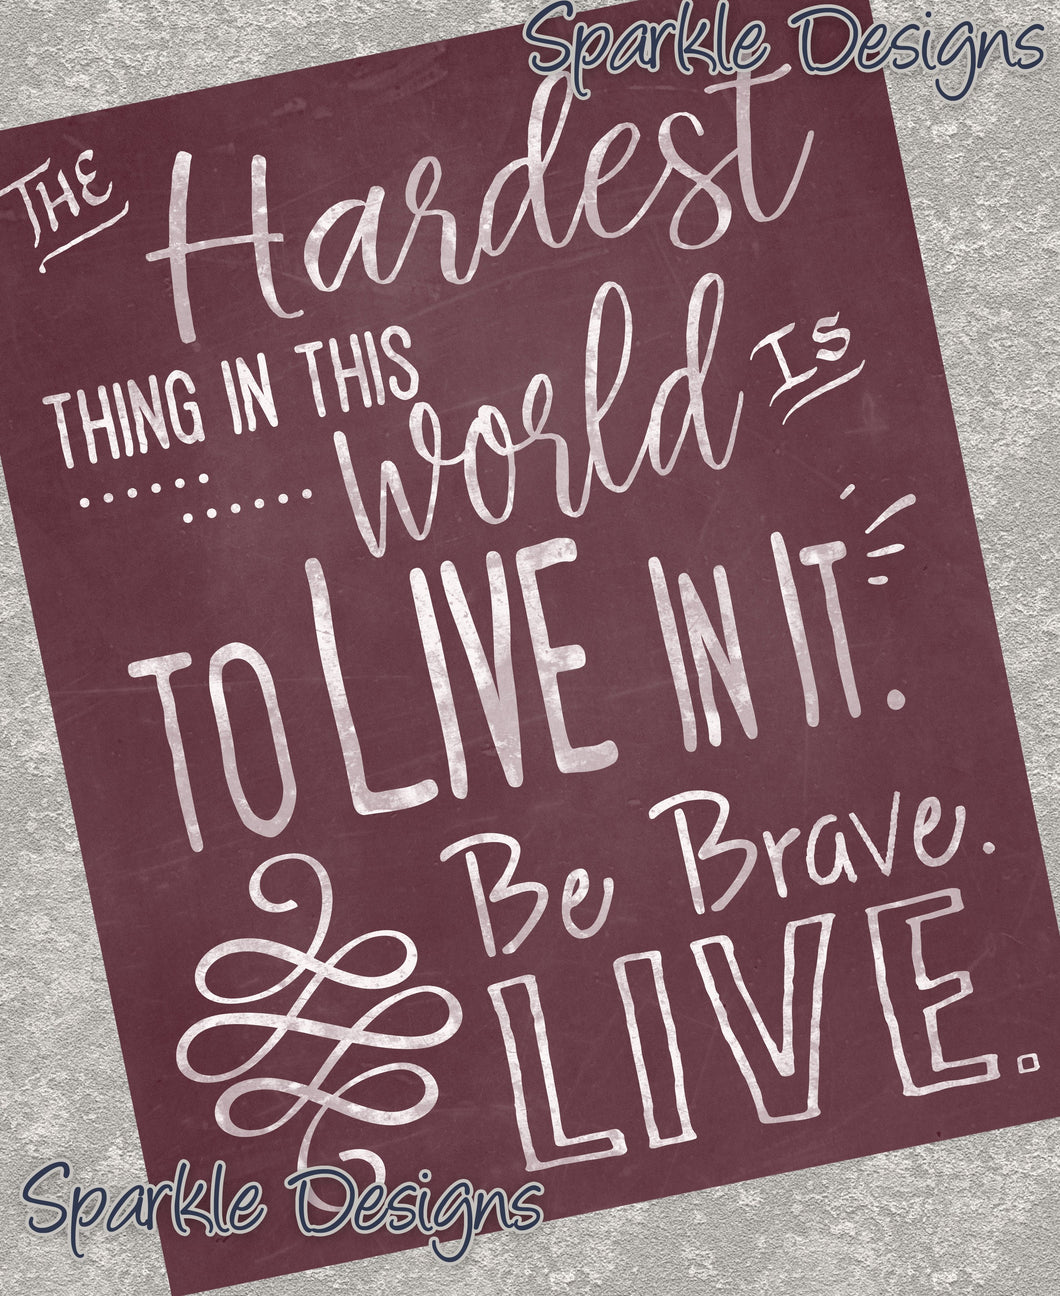 The hardest thing in this world is to live in it. Be brave. Live. - 170 wood Print